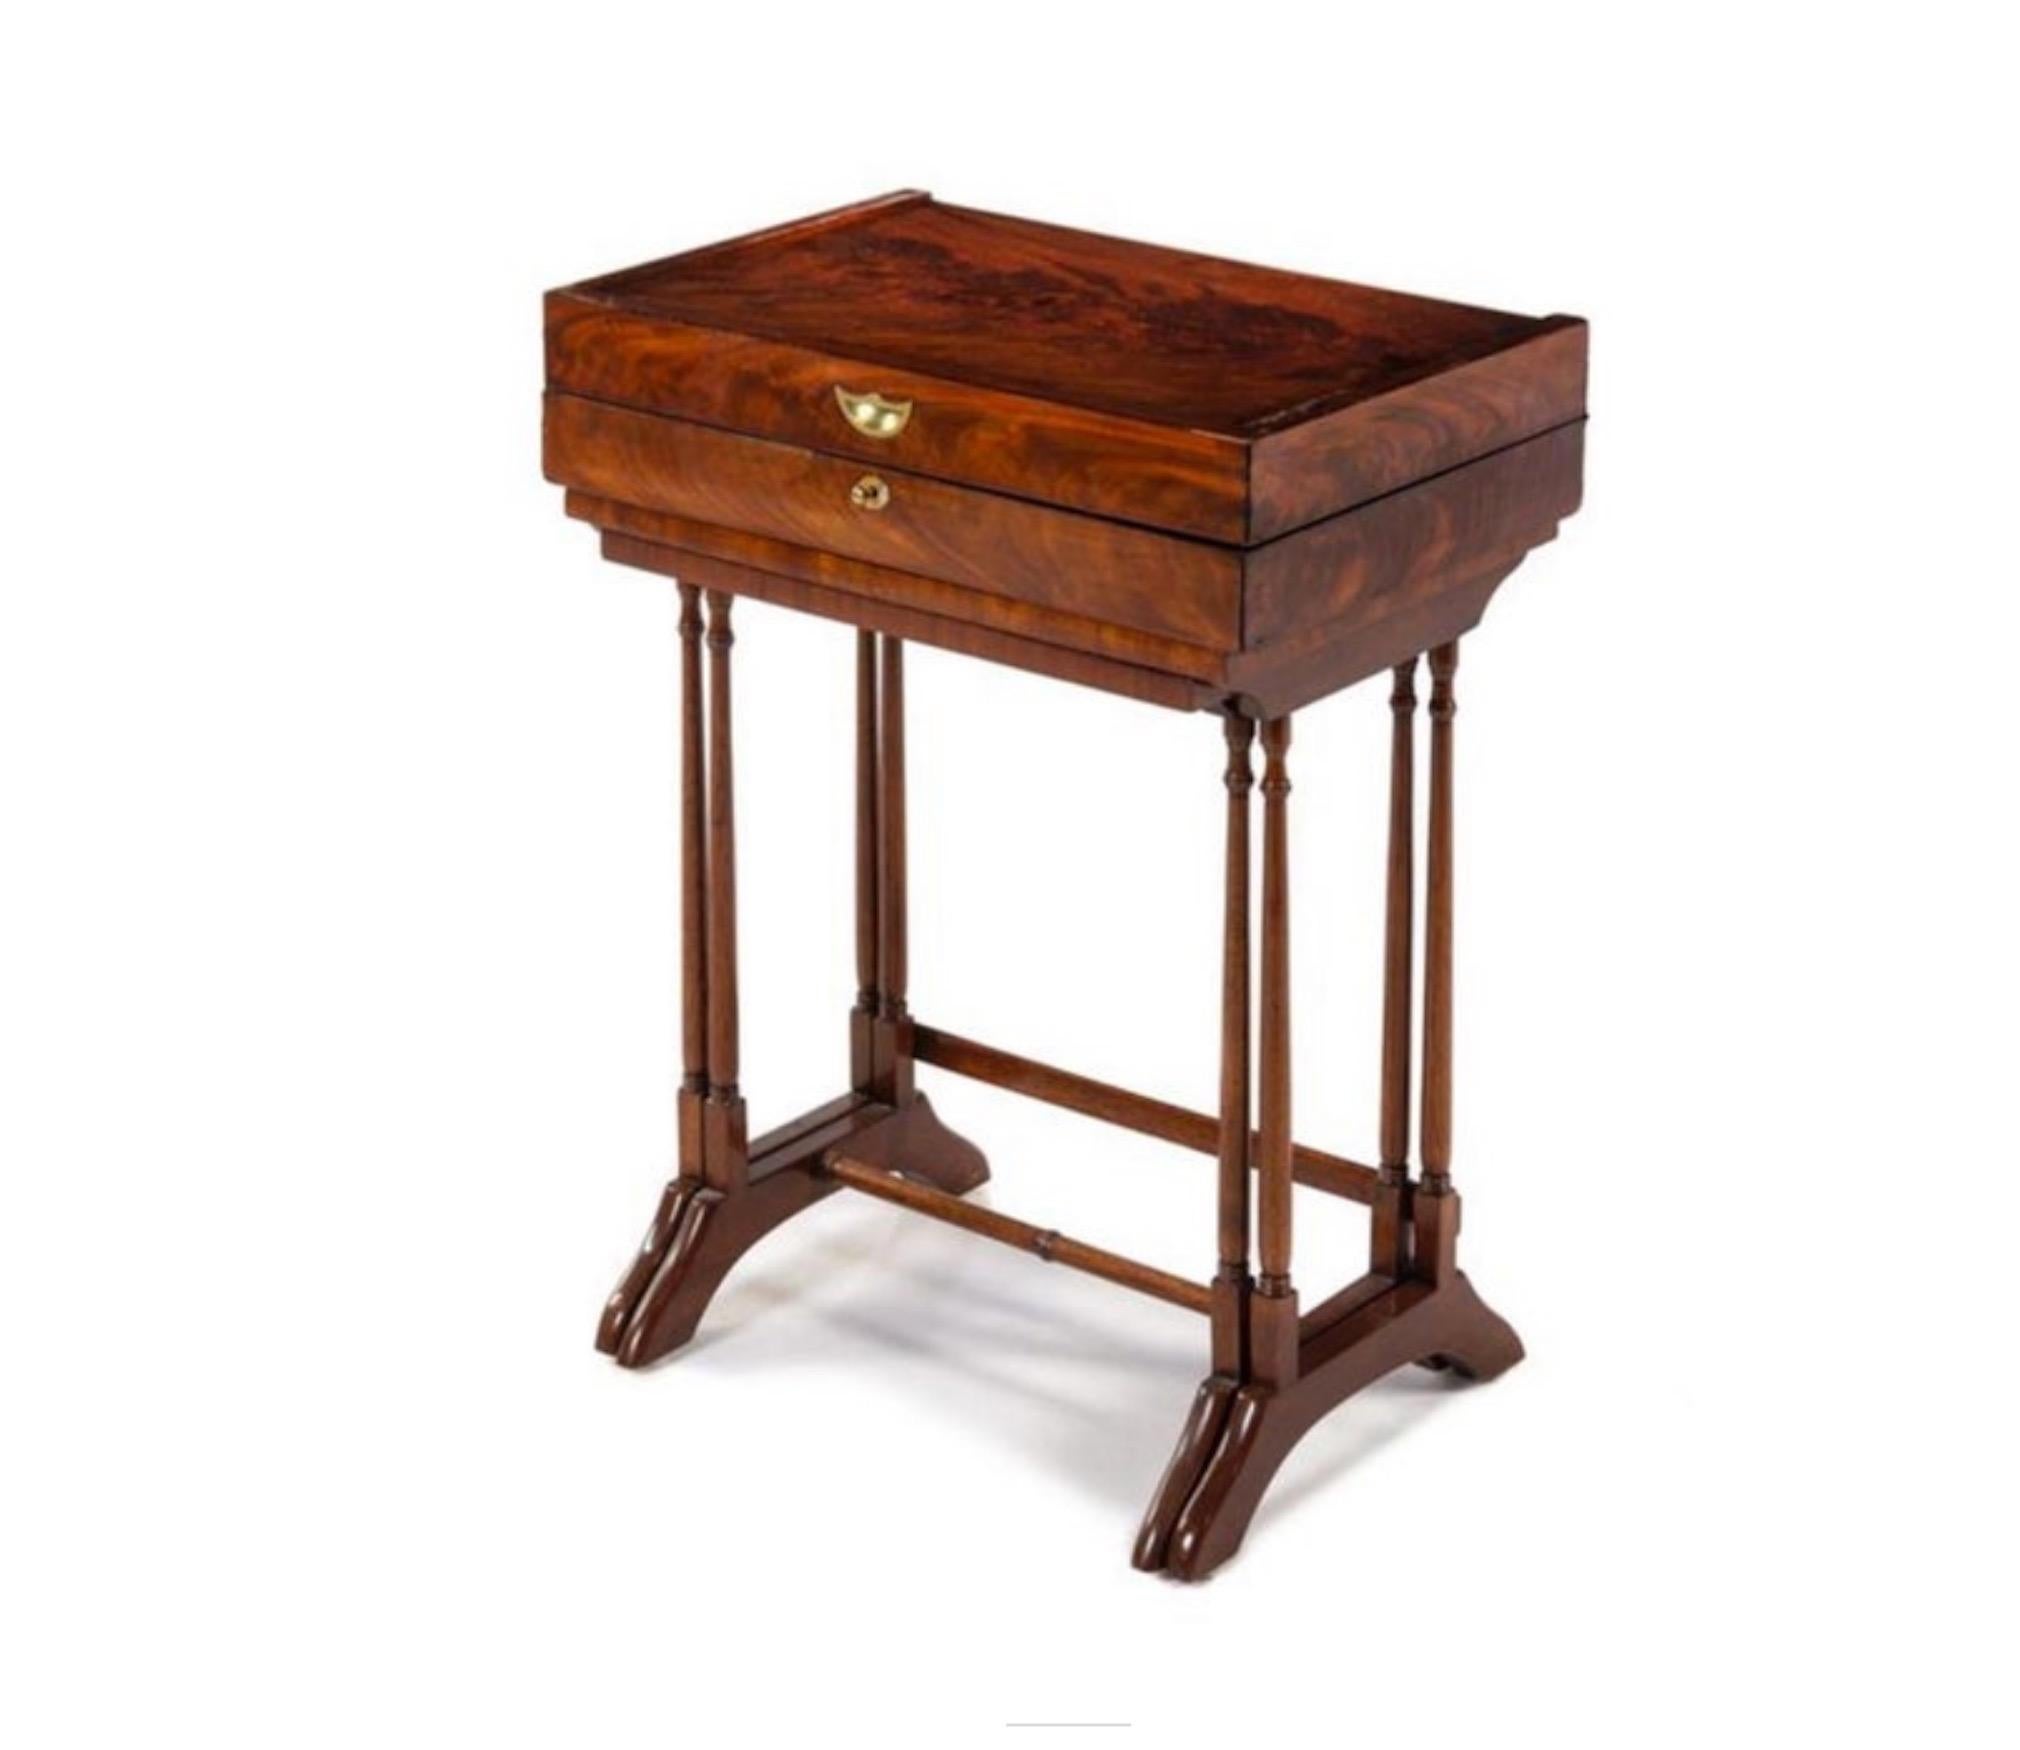 19th Century 19th English Walnut Games Table, Top Flips For Both Chess And Cribbage/bsckgammo